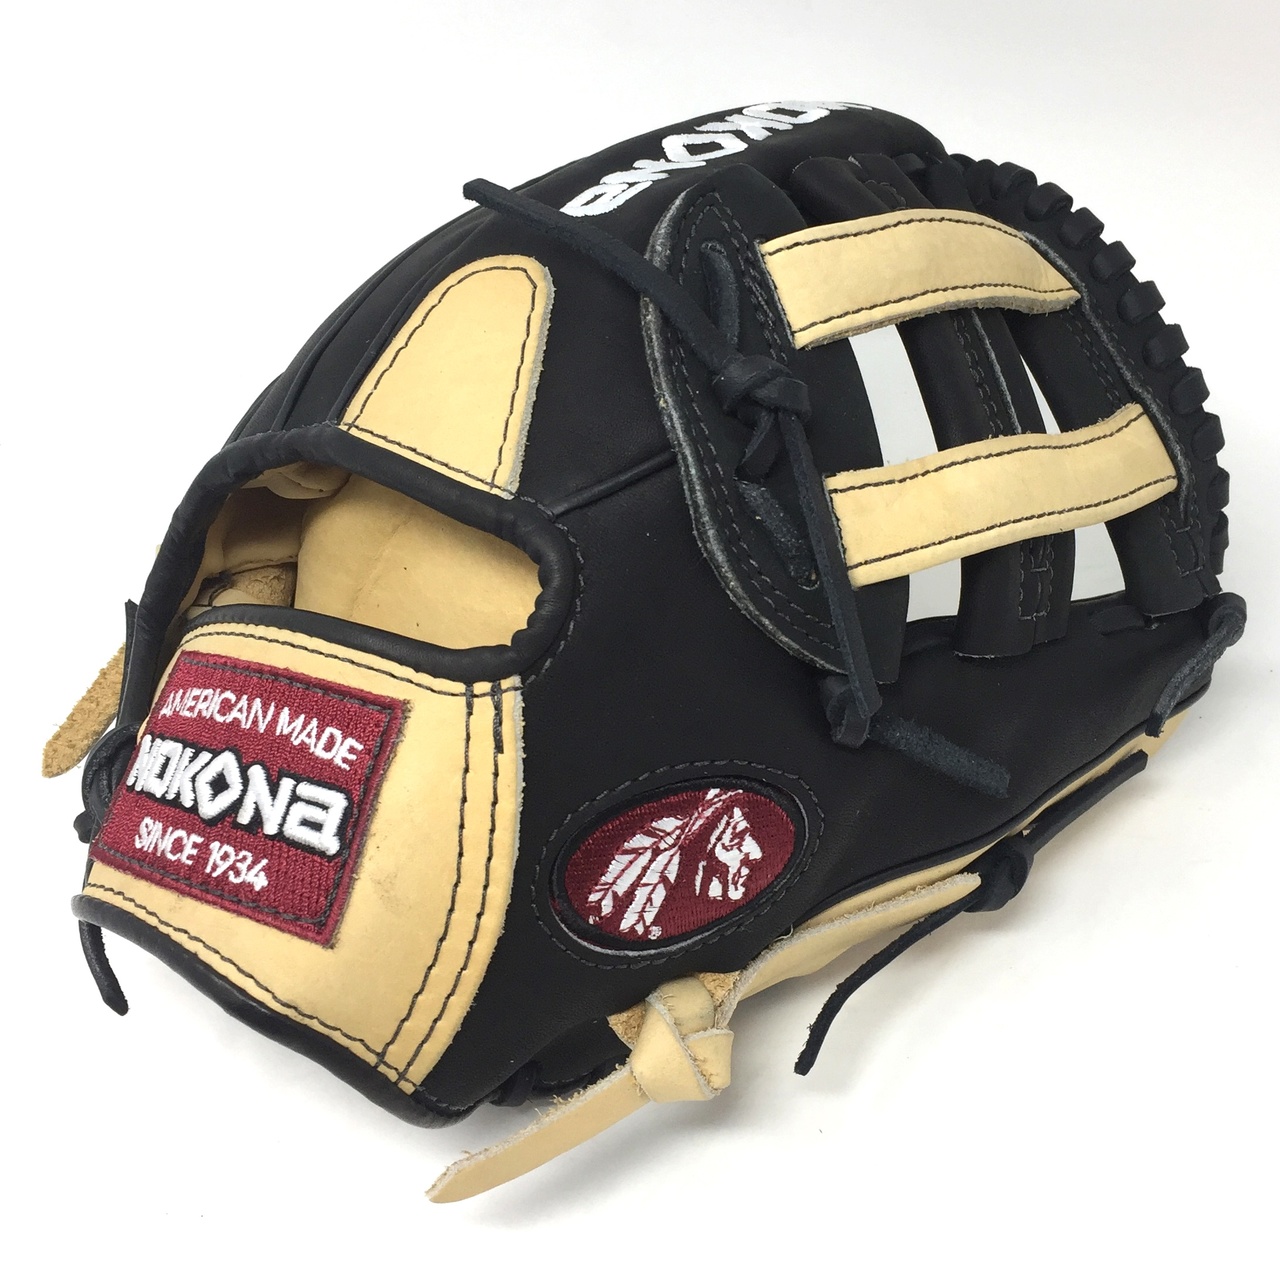 Young Adult Glove made of American Bison and Super soft Steerhide leather combined in black and cream colors. Nokona Alpha Baseball Glove is a select series glove built with some break in needed. Using the highest quality leathers so that players can perform at the top of their game. A position specific, light weight, durable, and high performing glove for club and elite players.